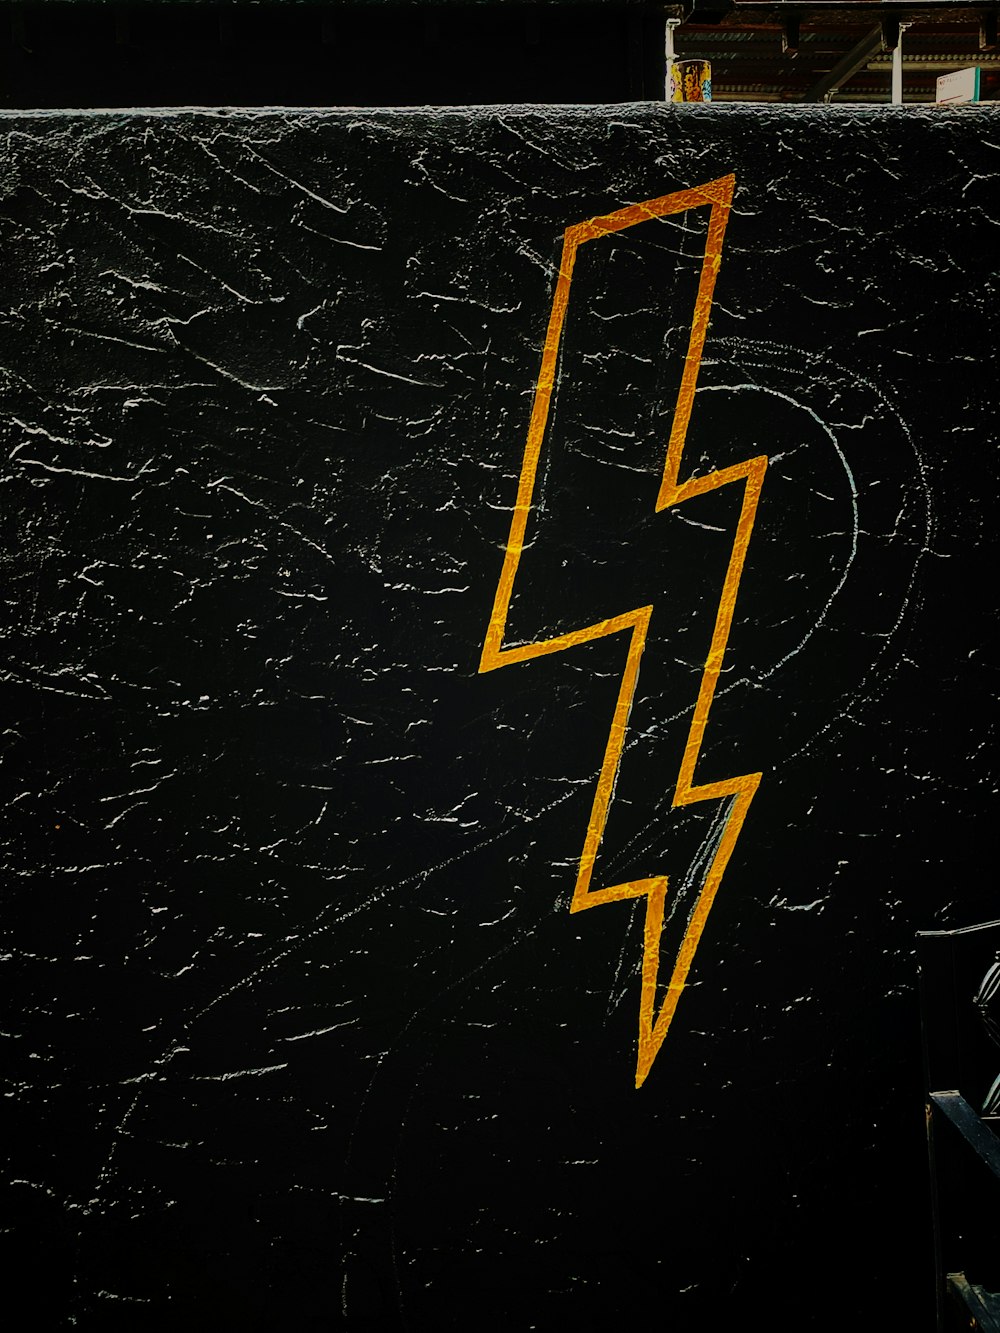 a picture of a lightning bolt painted on the side of a building